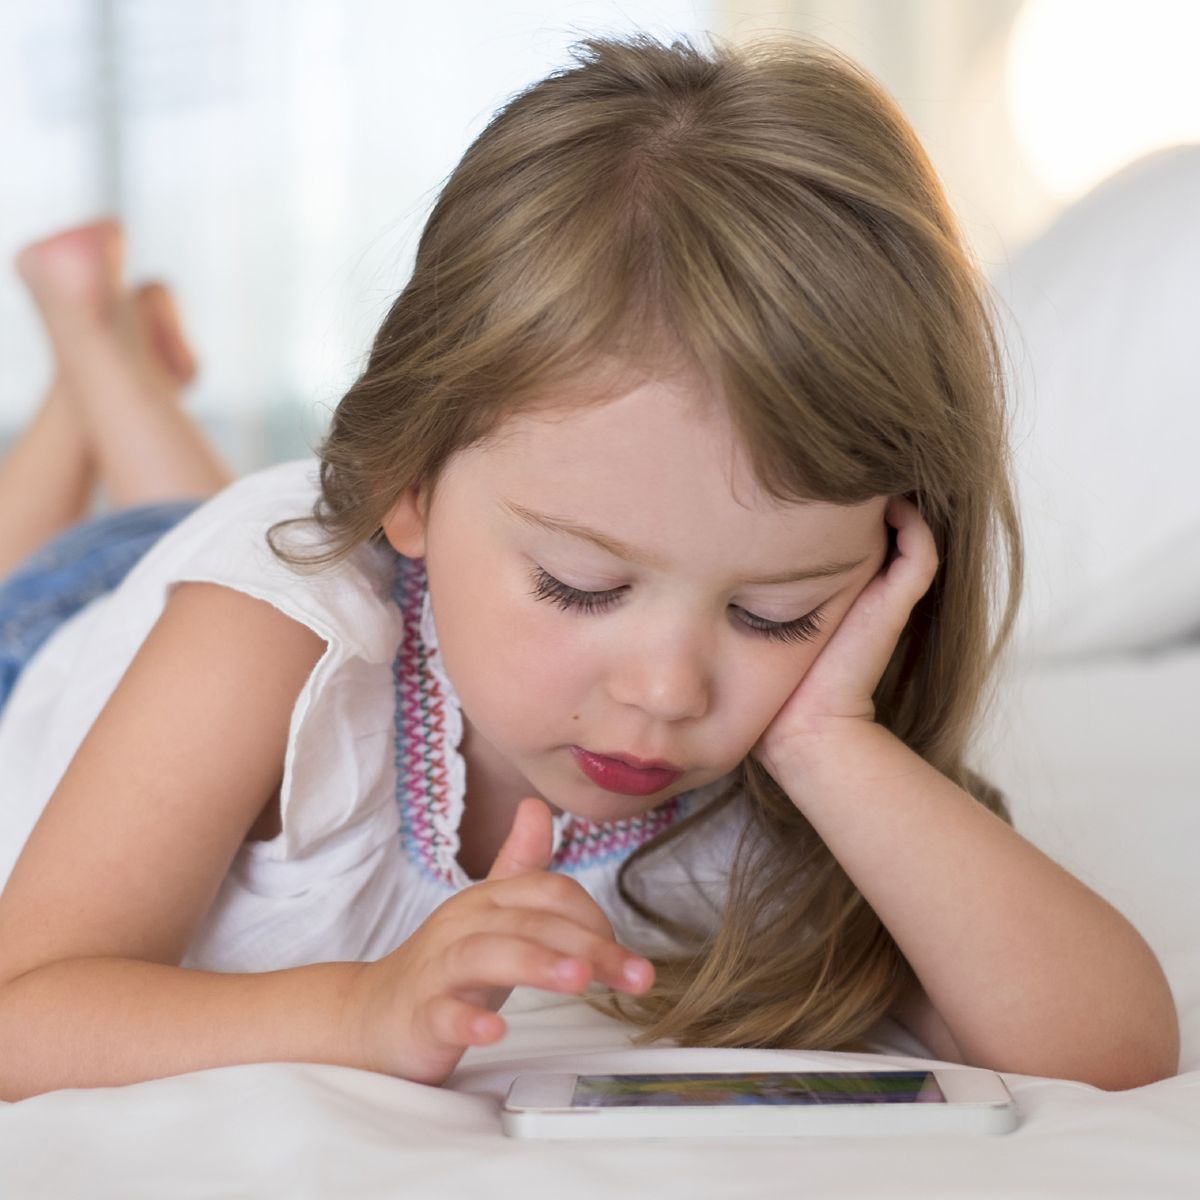 Doctors say using smartphones can make your kids cross-eyed